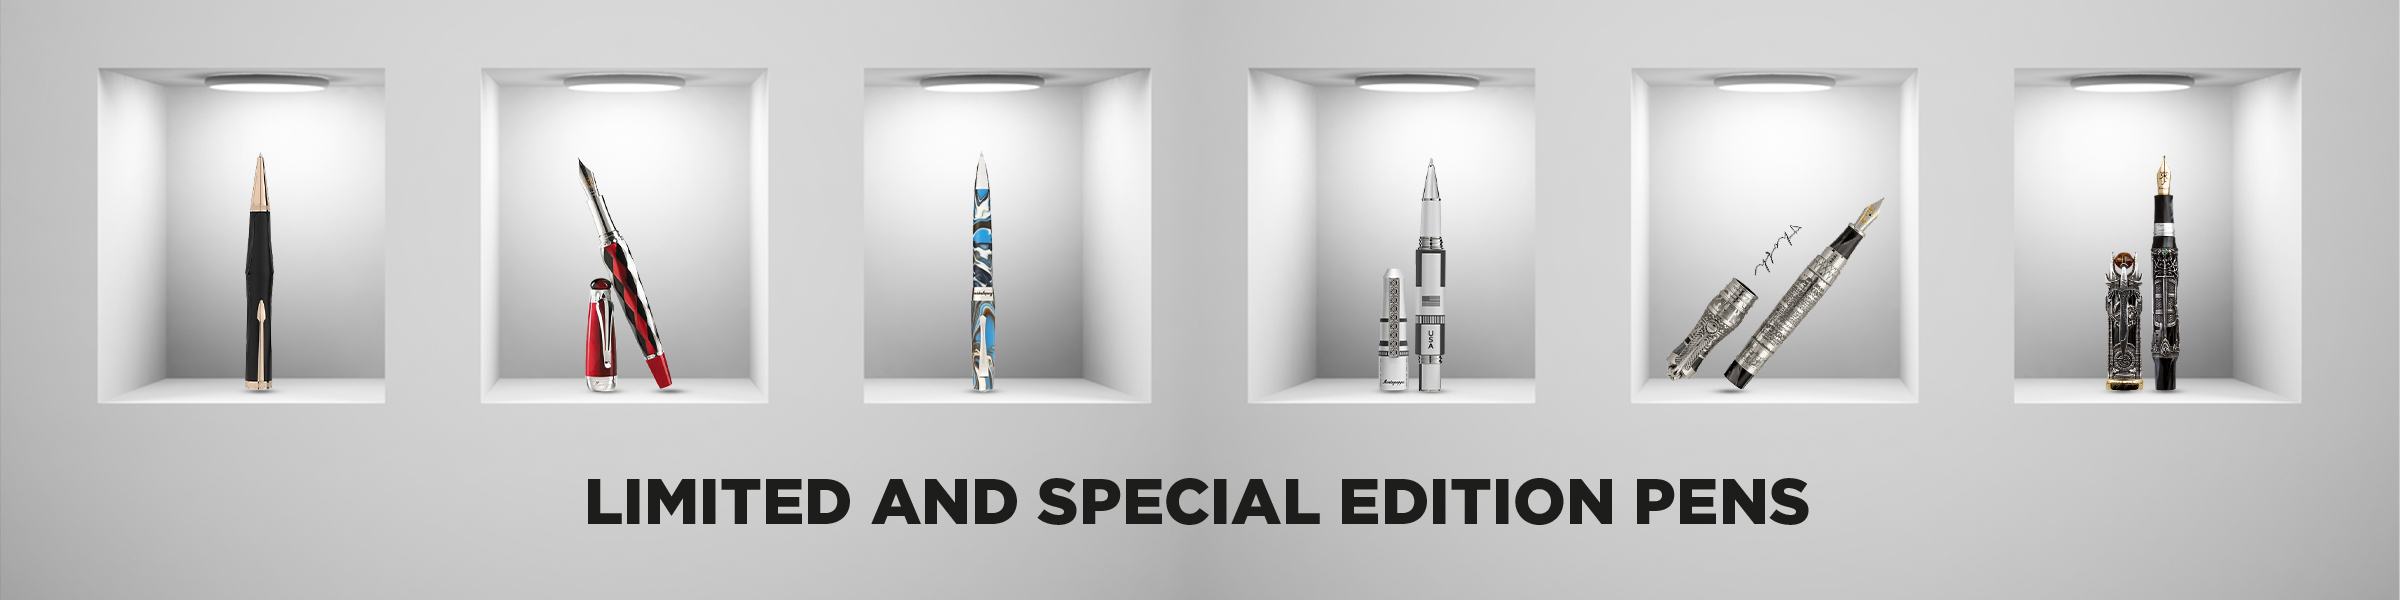 Special and Limited Edition pens 